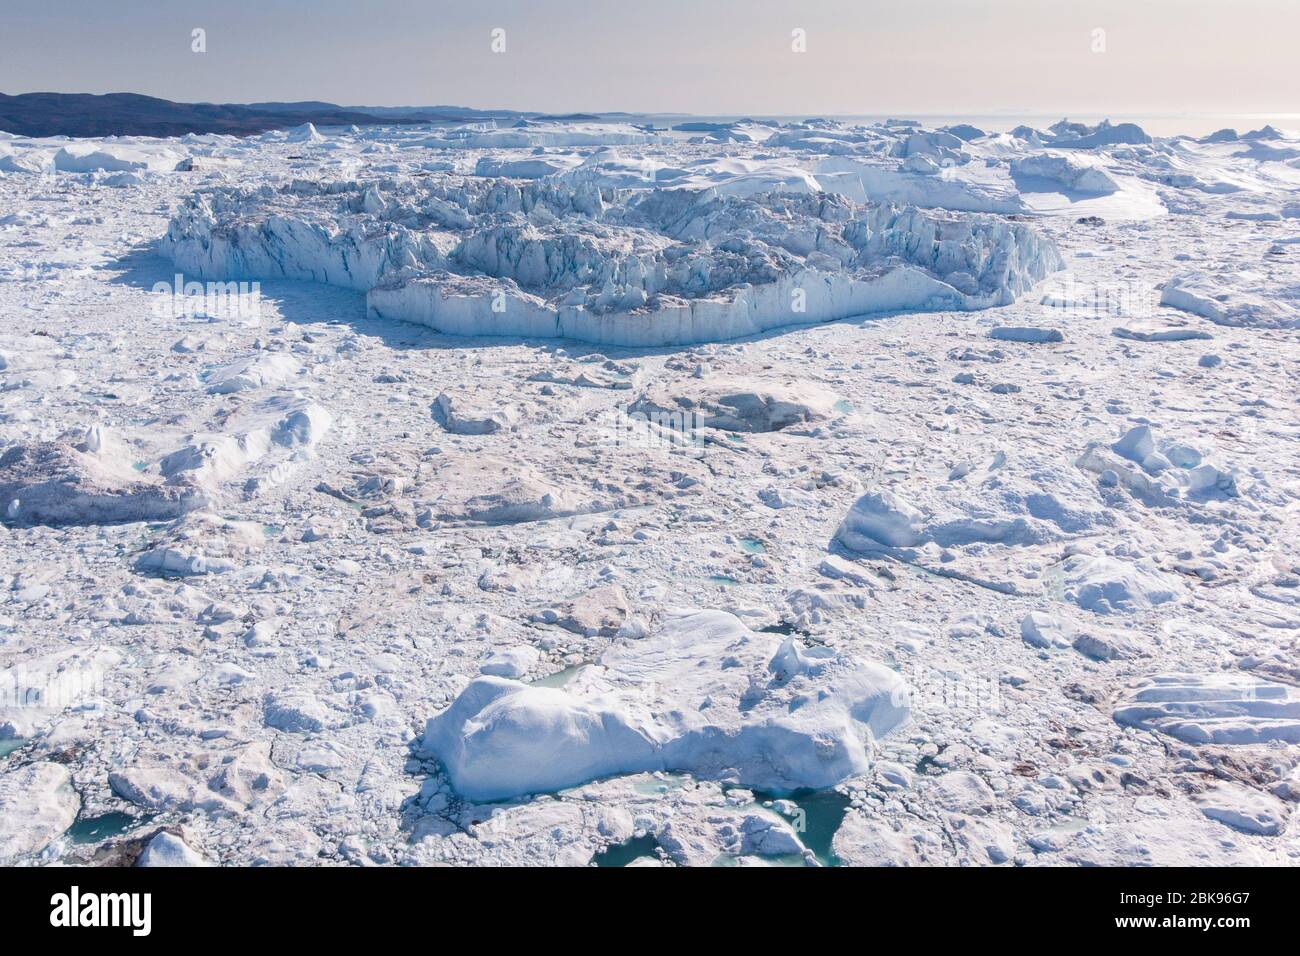 Aerial view of Ilulissat Icefjord, Greenland Stock Photo